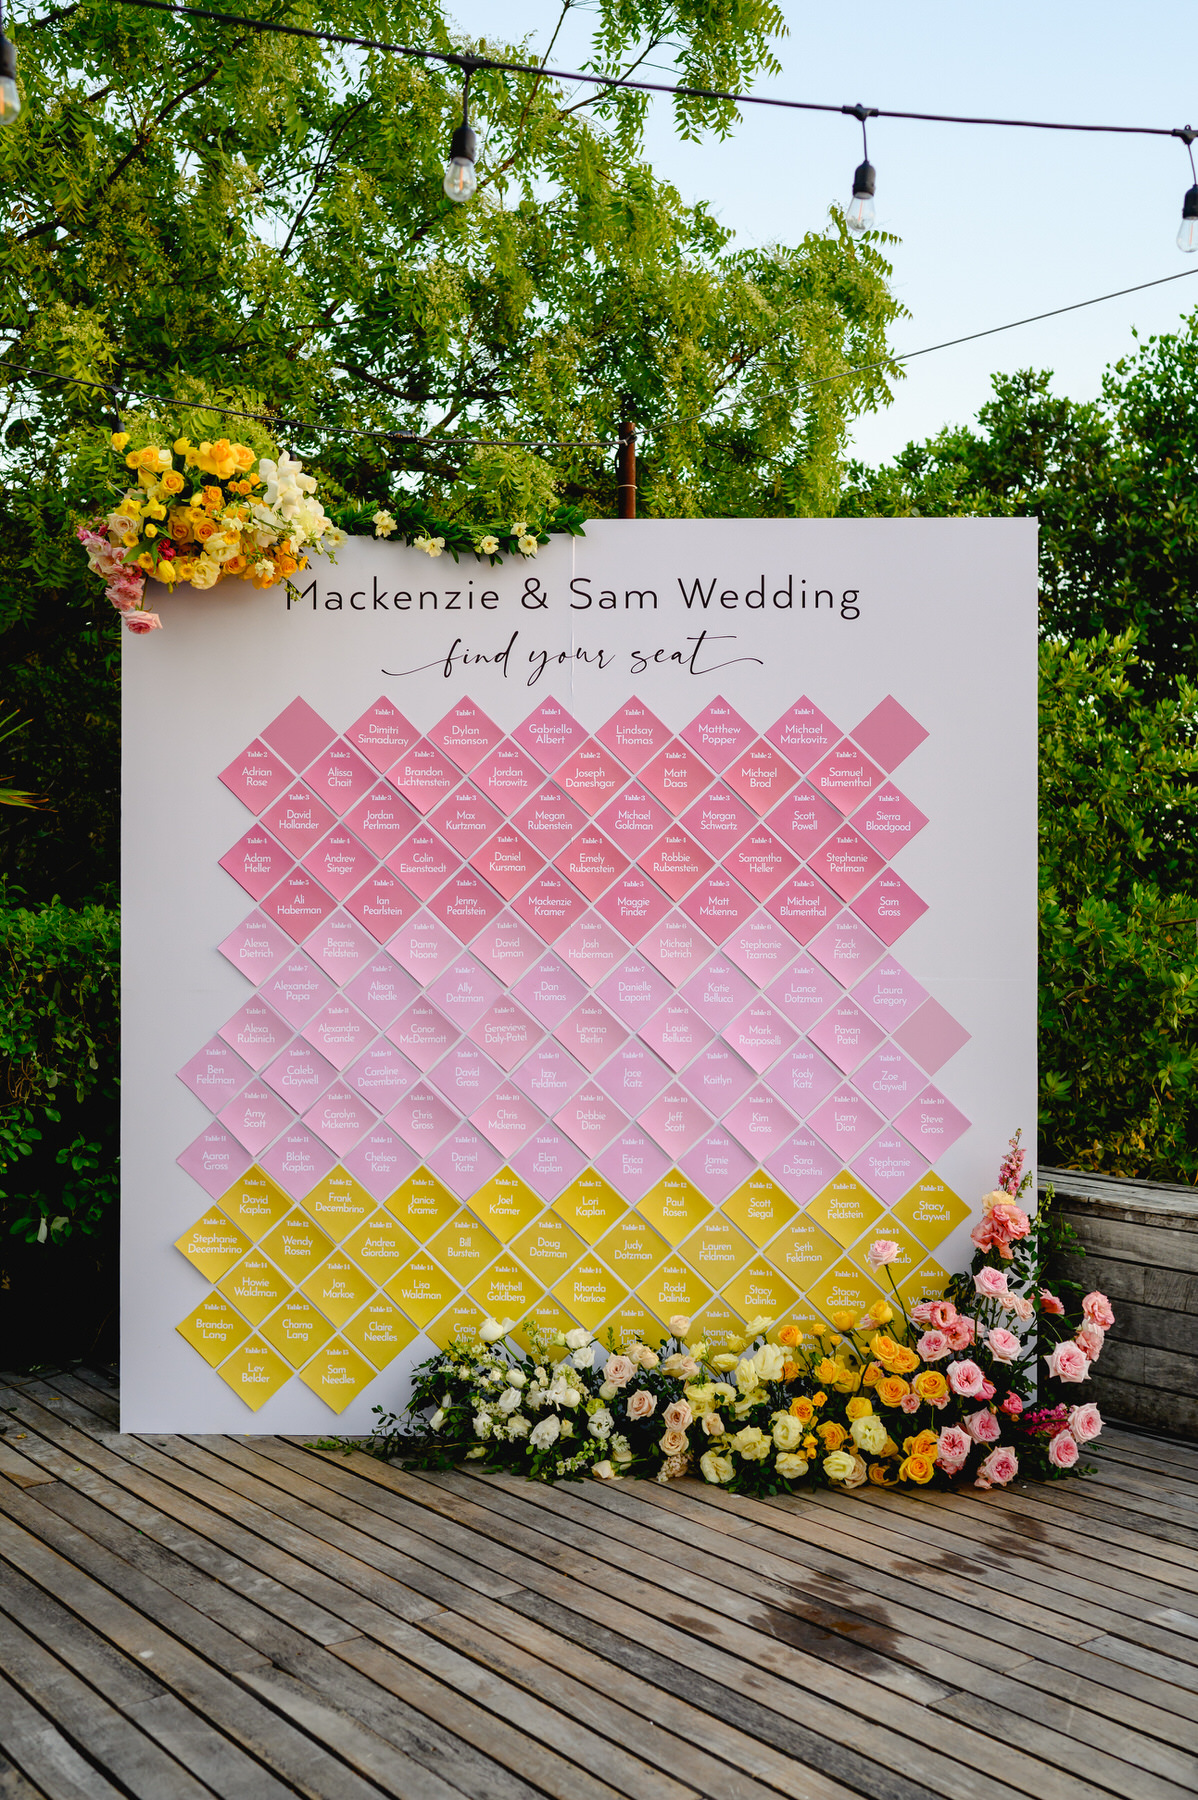 Charming wedding table chart in white and pink, adorned with vibrant flowers for a colorful seating arrangement. Find your seat ideas for summer wedding receptions. 